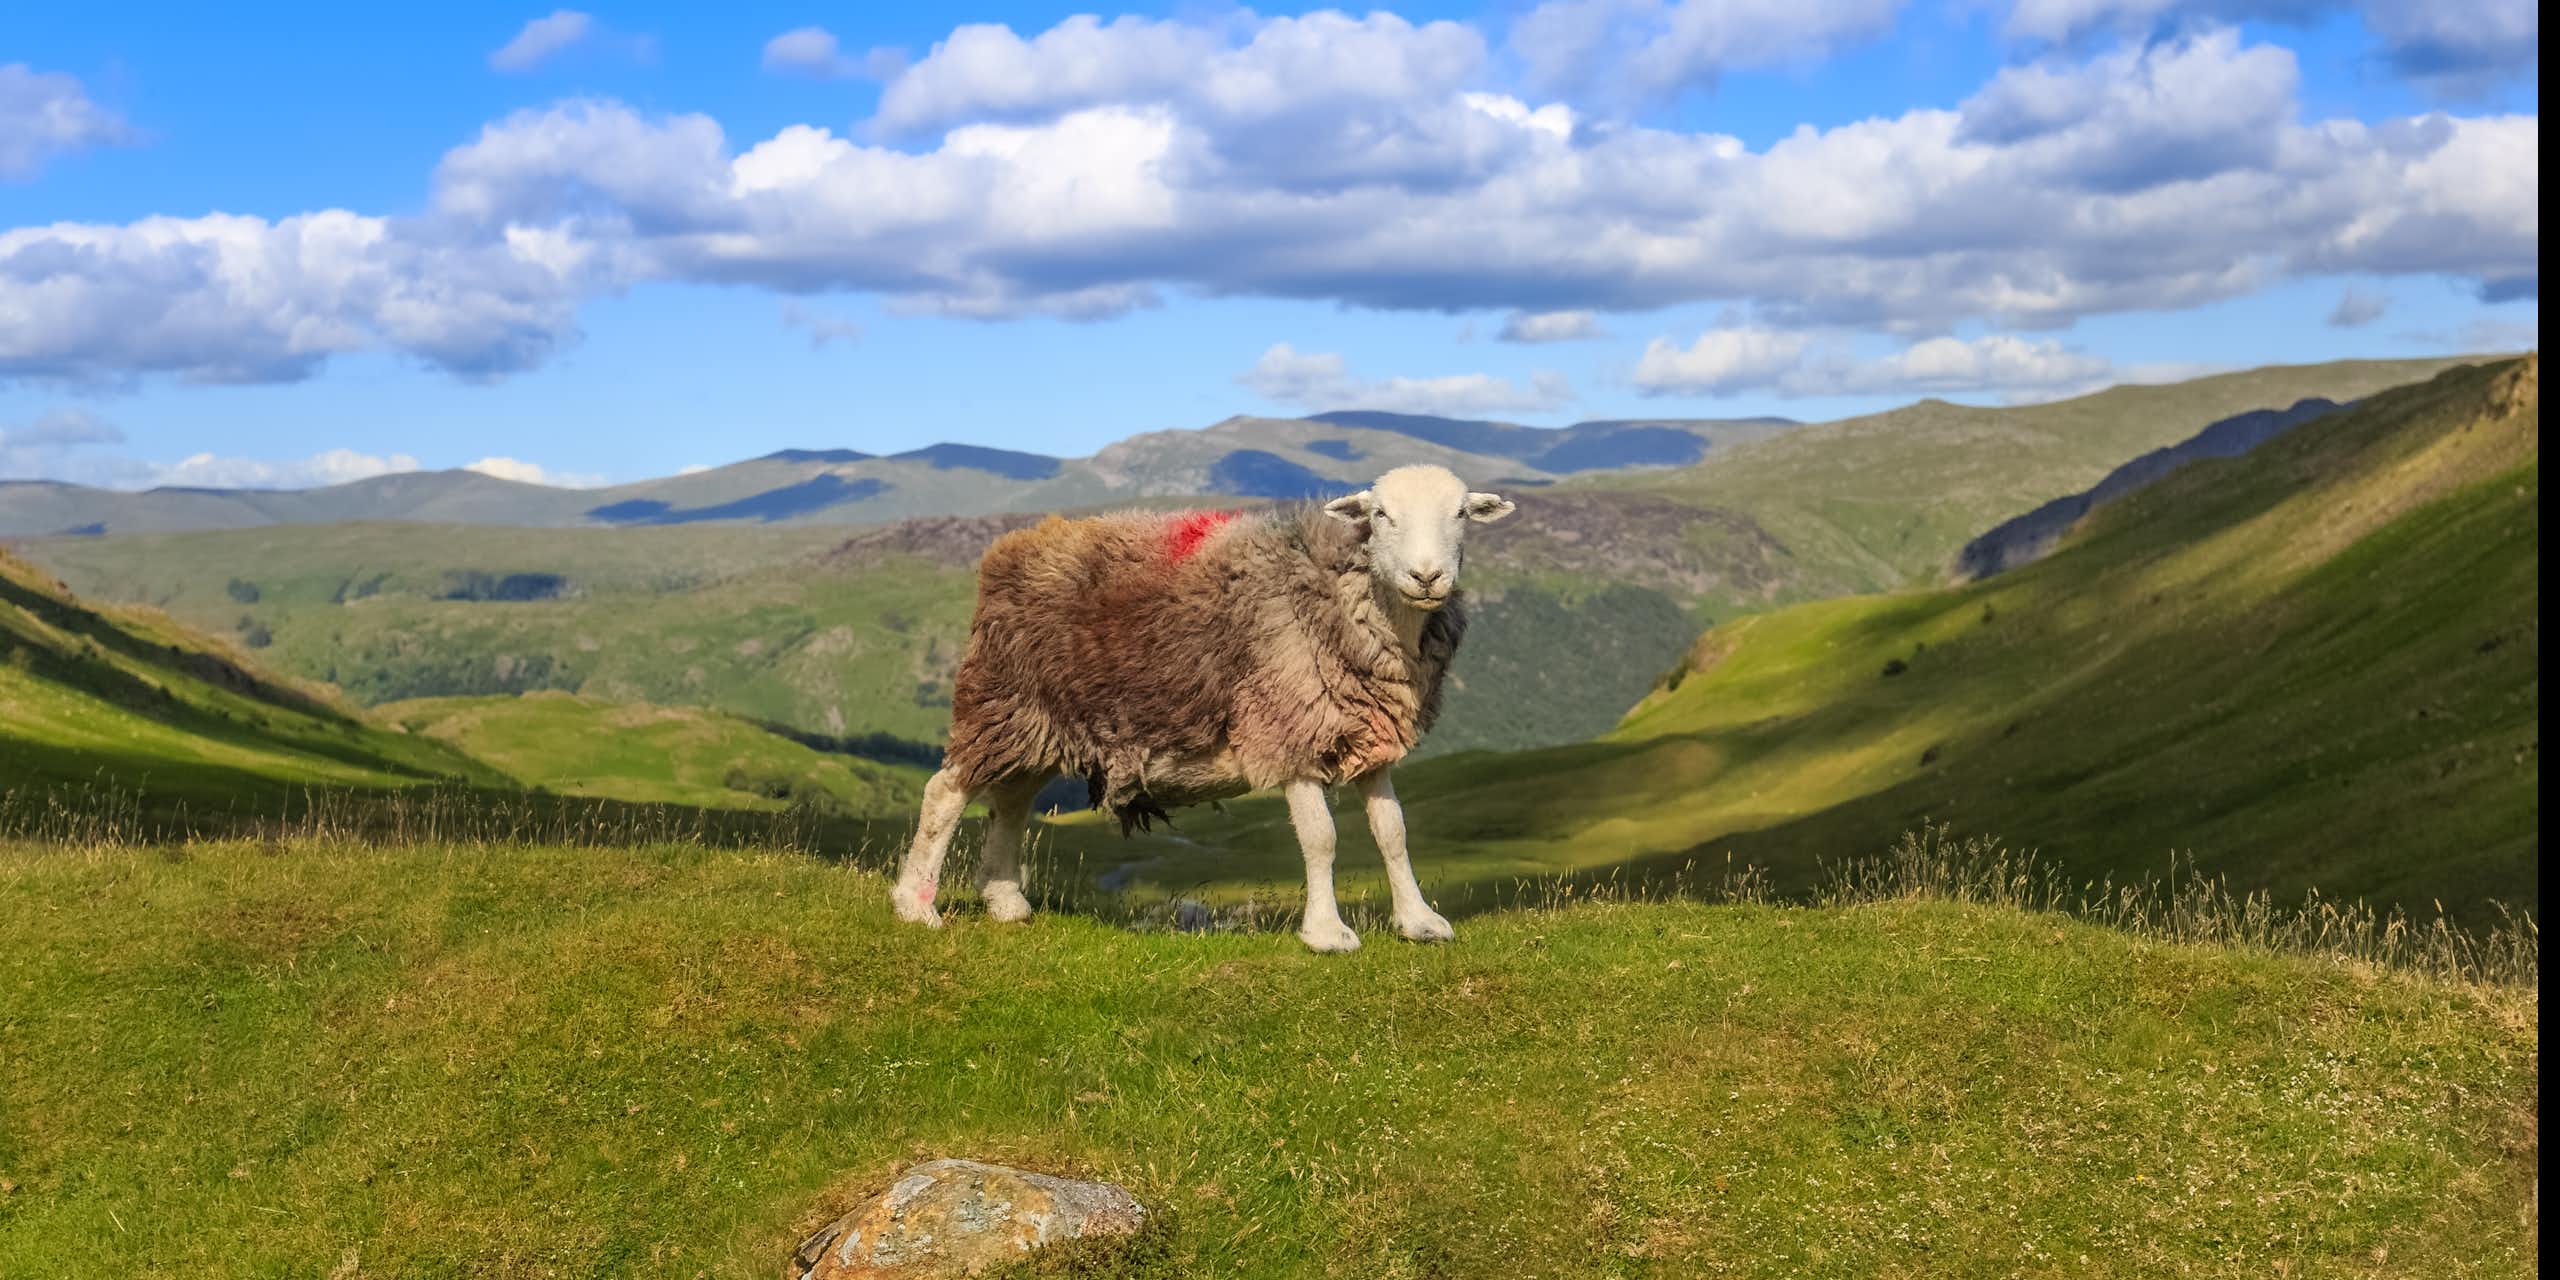 A sheep with hilly background.